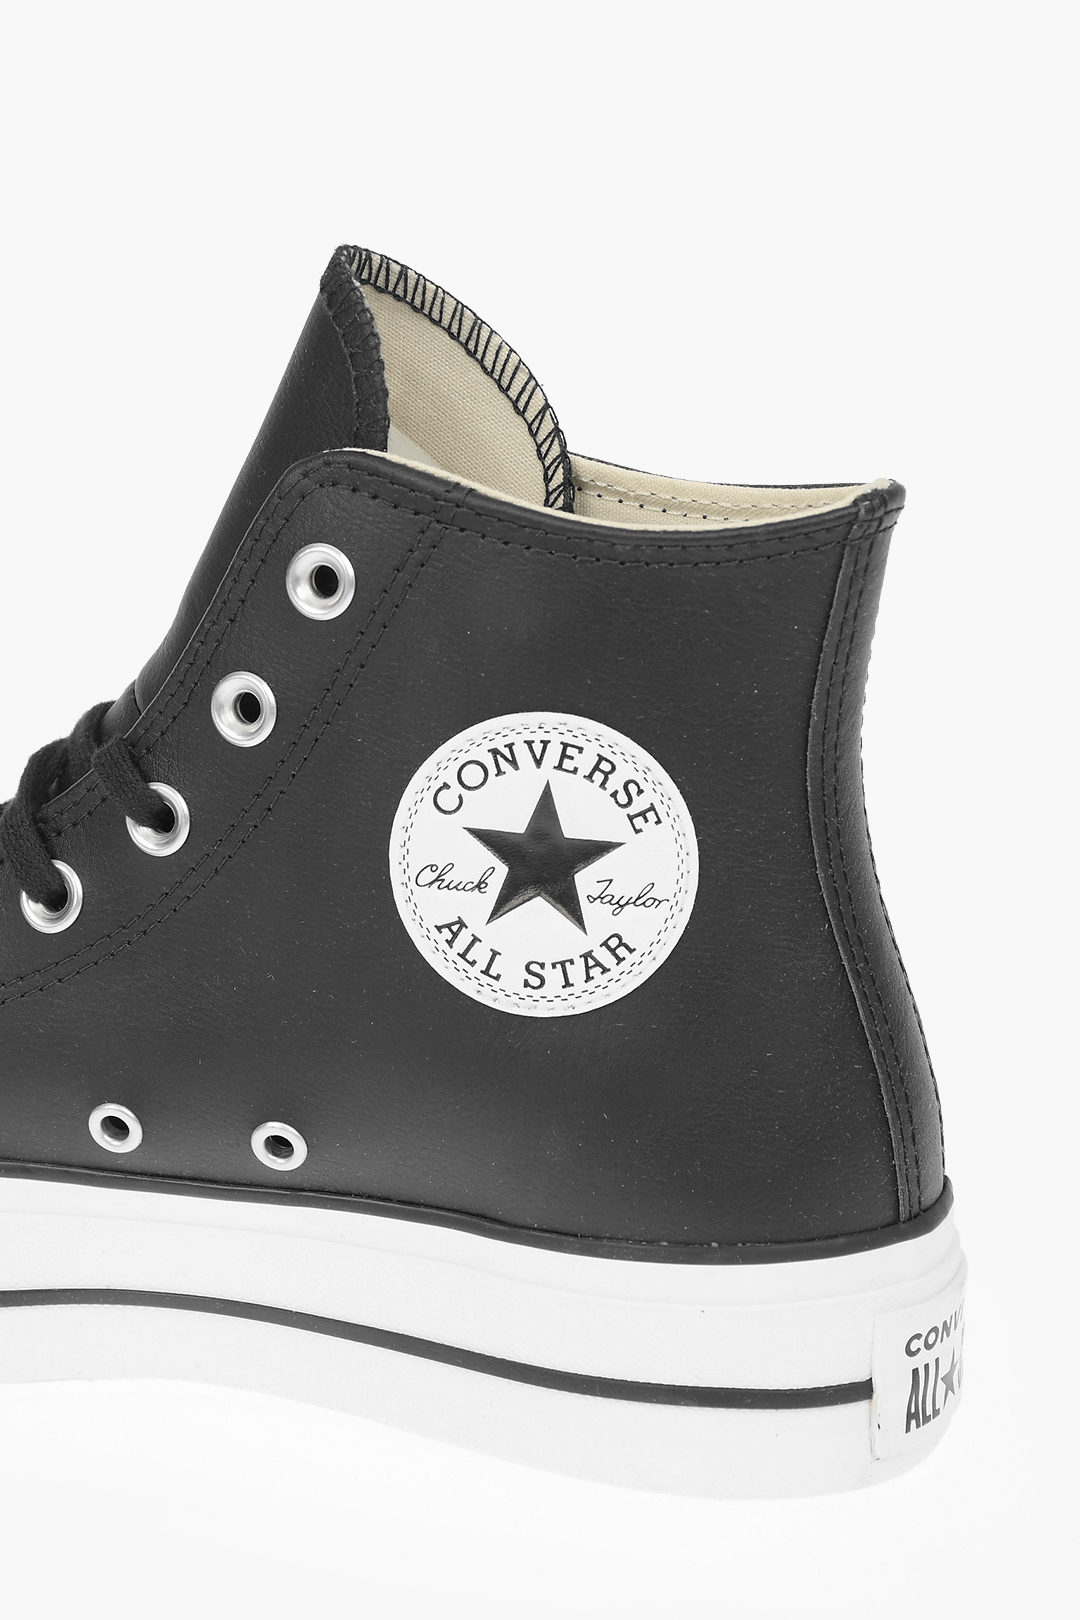 betalen Mangel Wrijven Converse ALL STAR 4cm Leather Sneakers with Platform women - Glamood Outlet